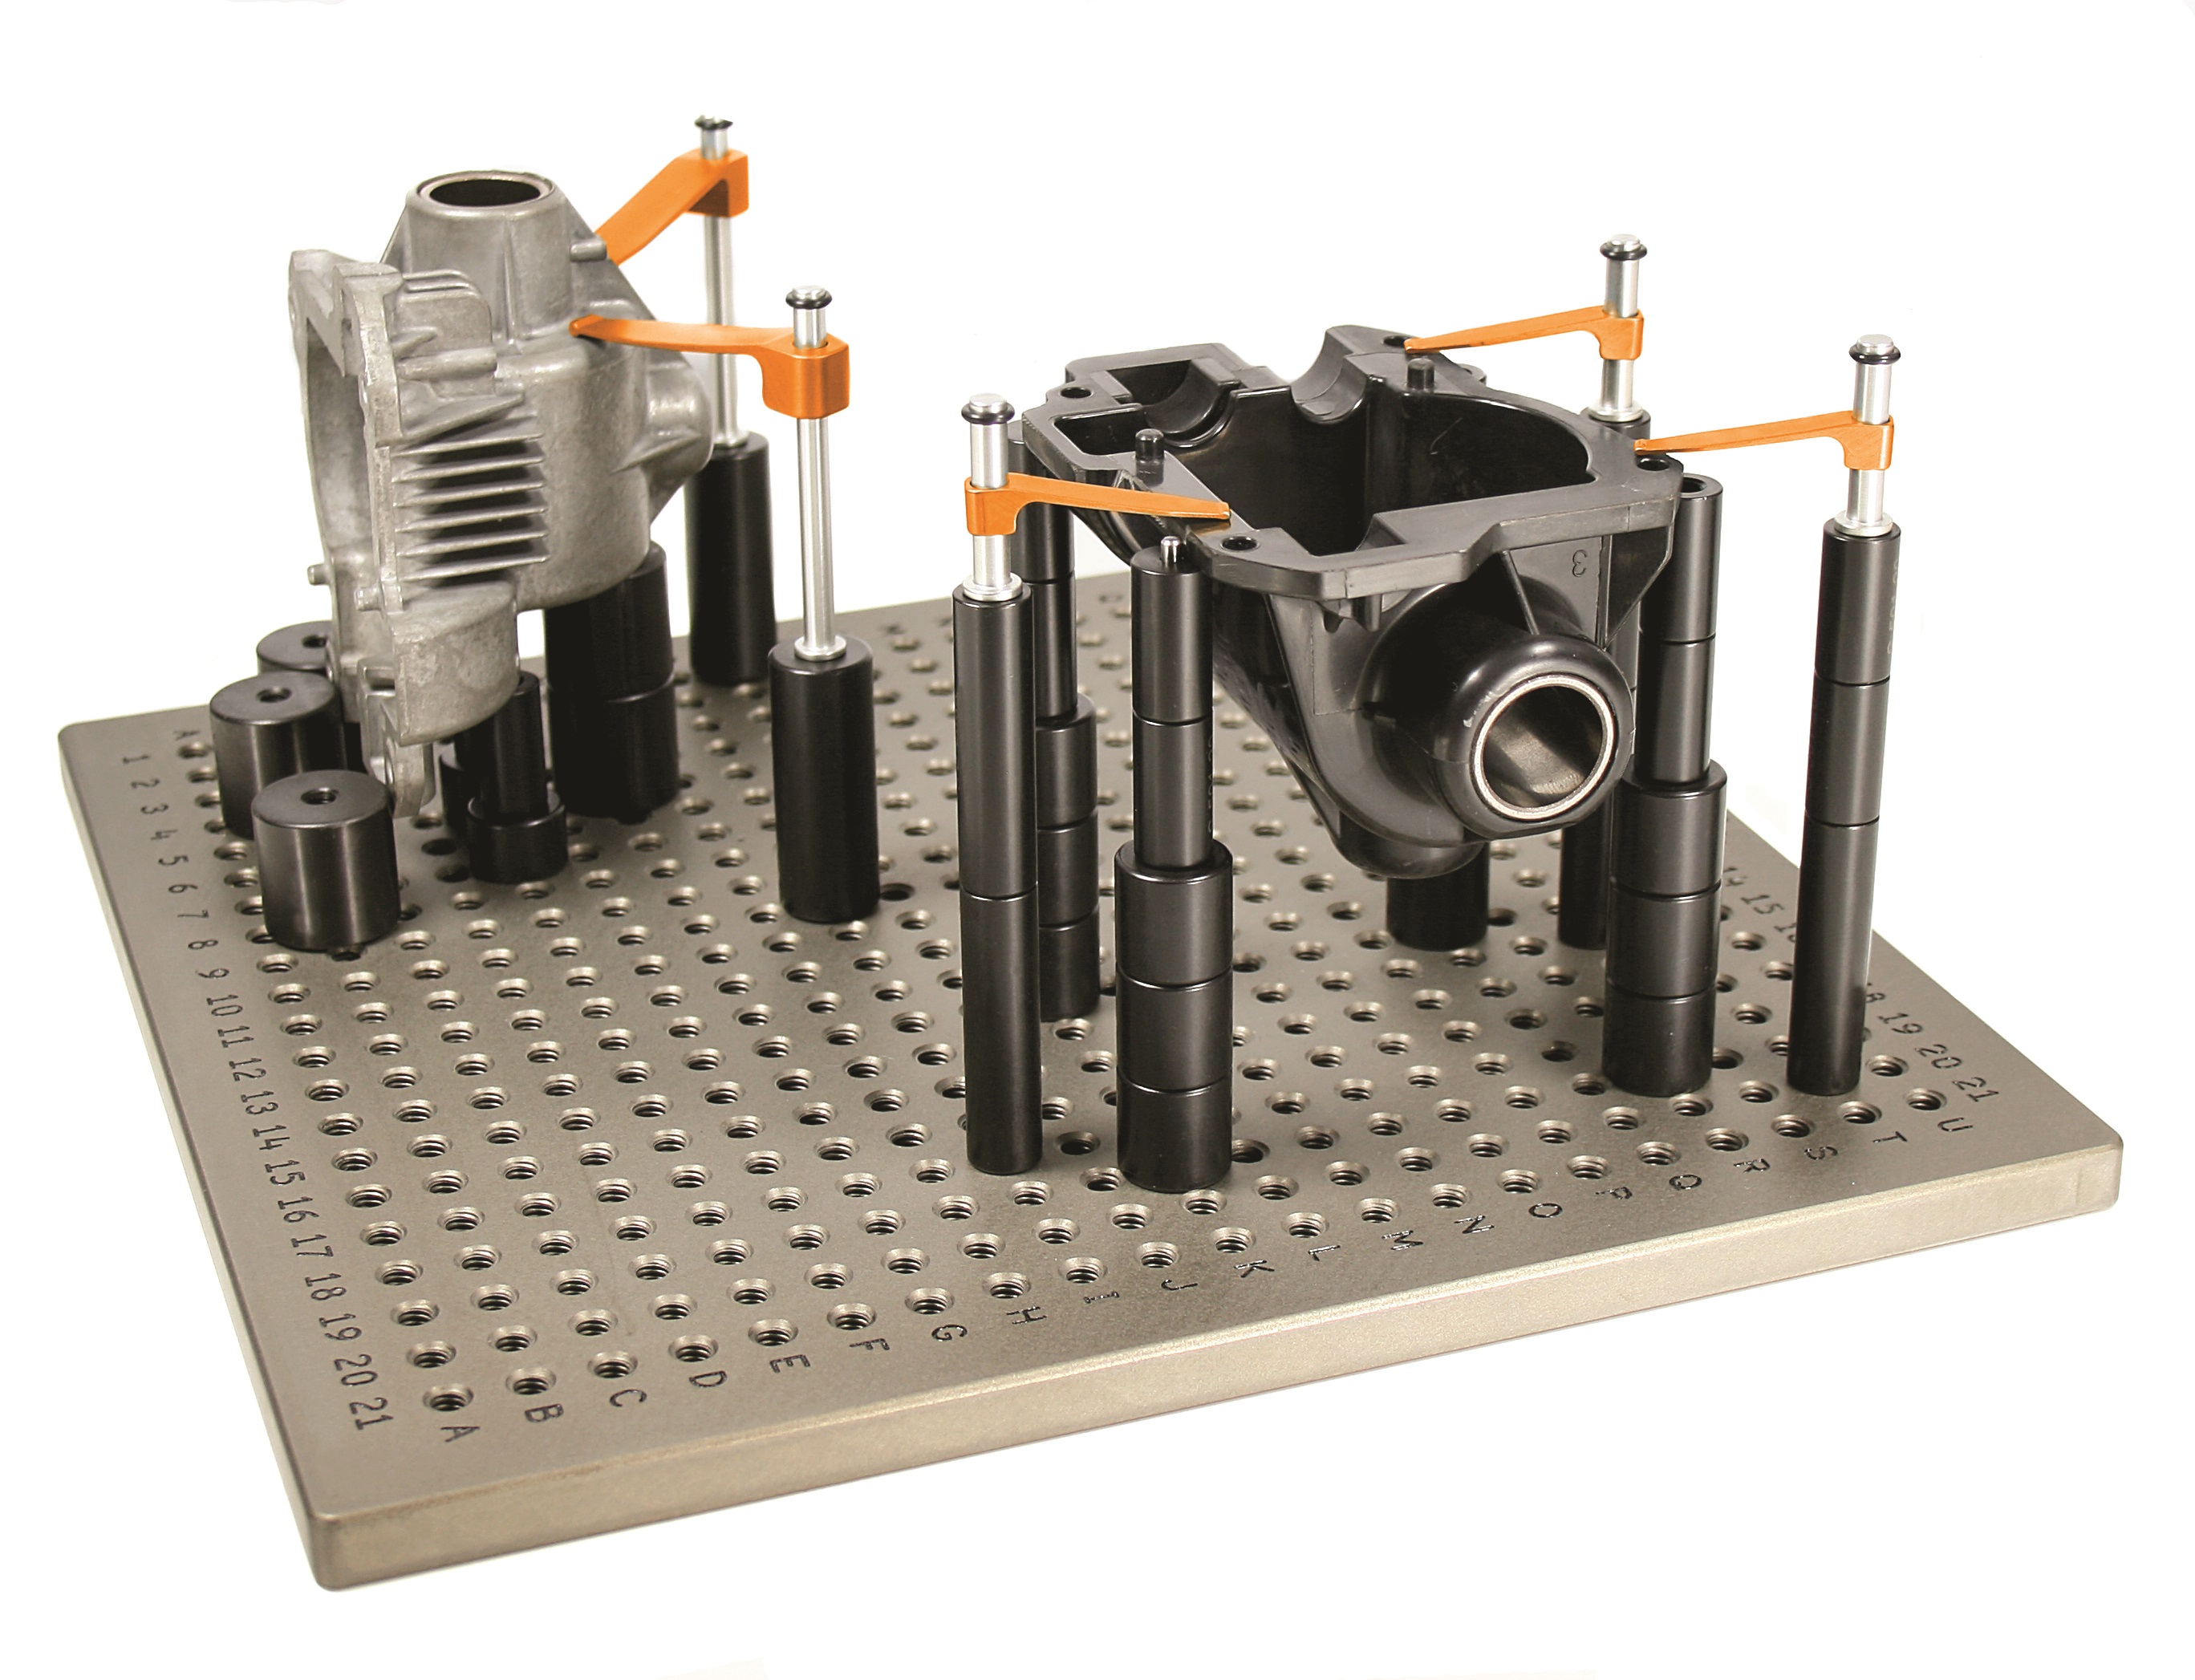 Renishaw Fixtures The New Single Source For Metrology Fixturing 